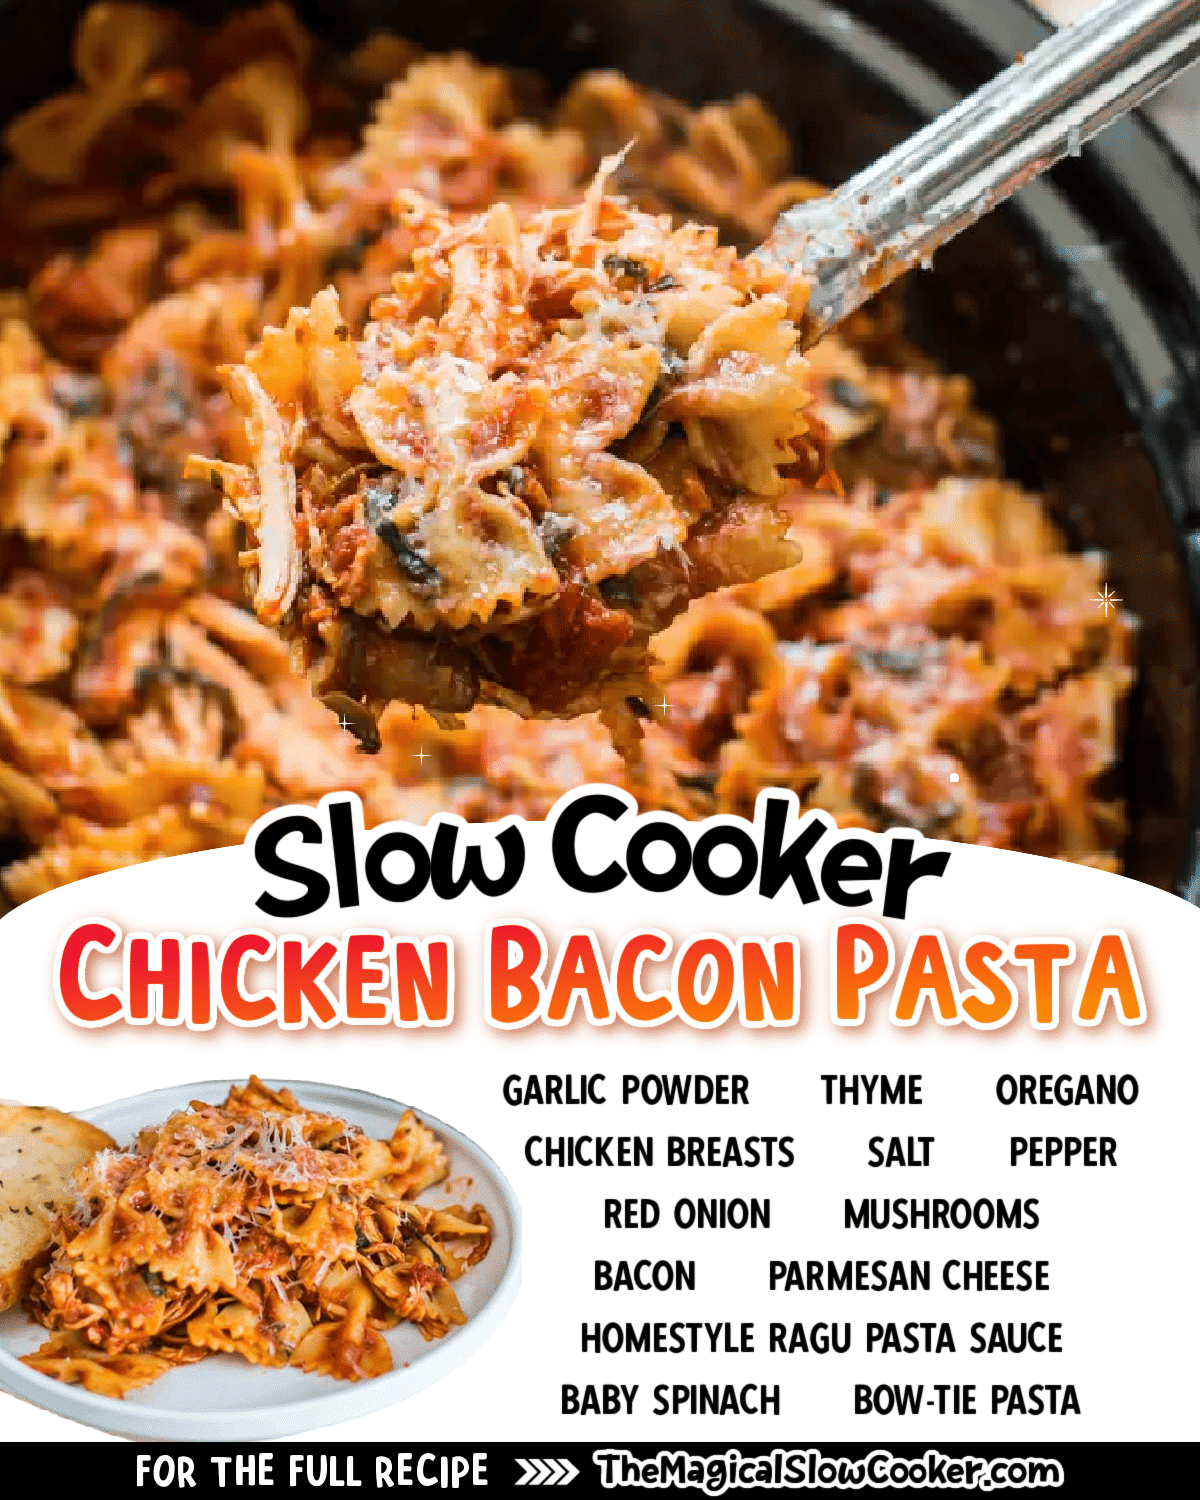 Images of chicken bacon pasta with text overlay of what the ingredients are.